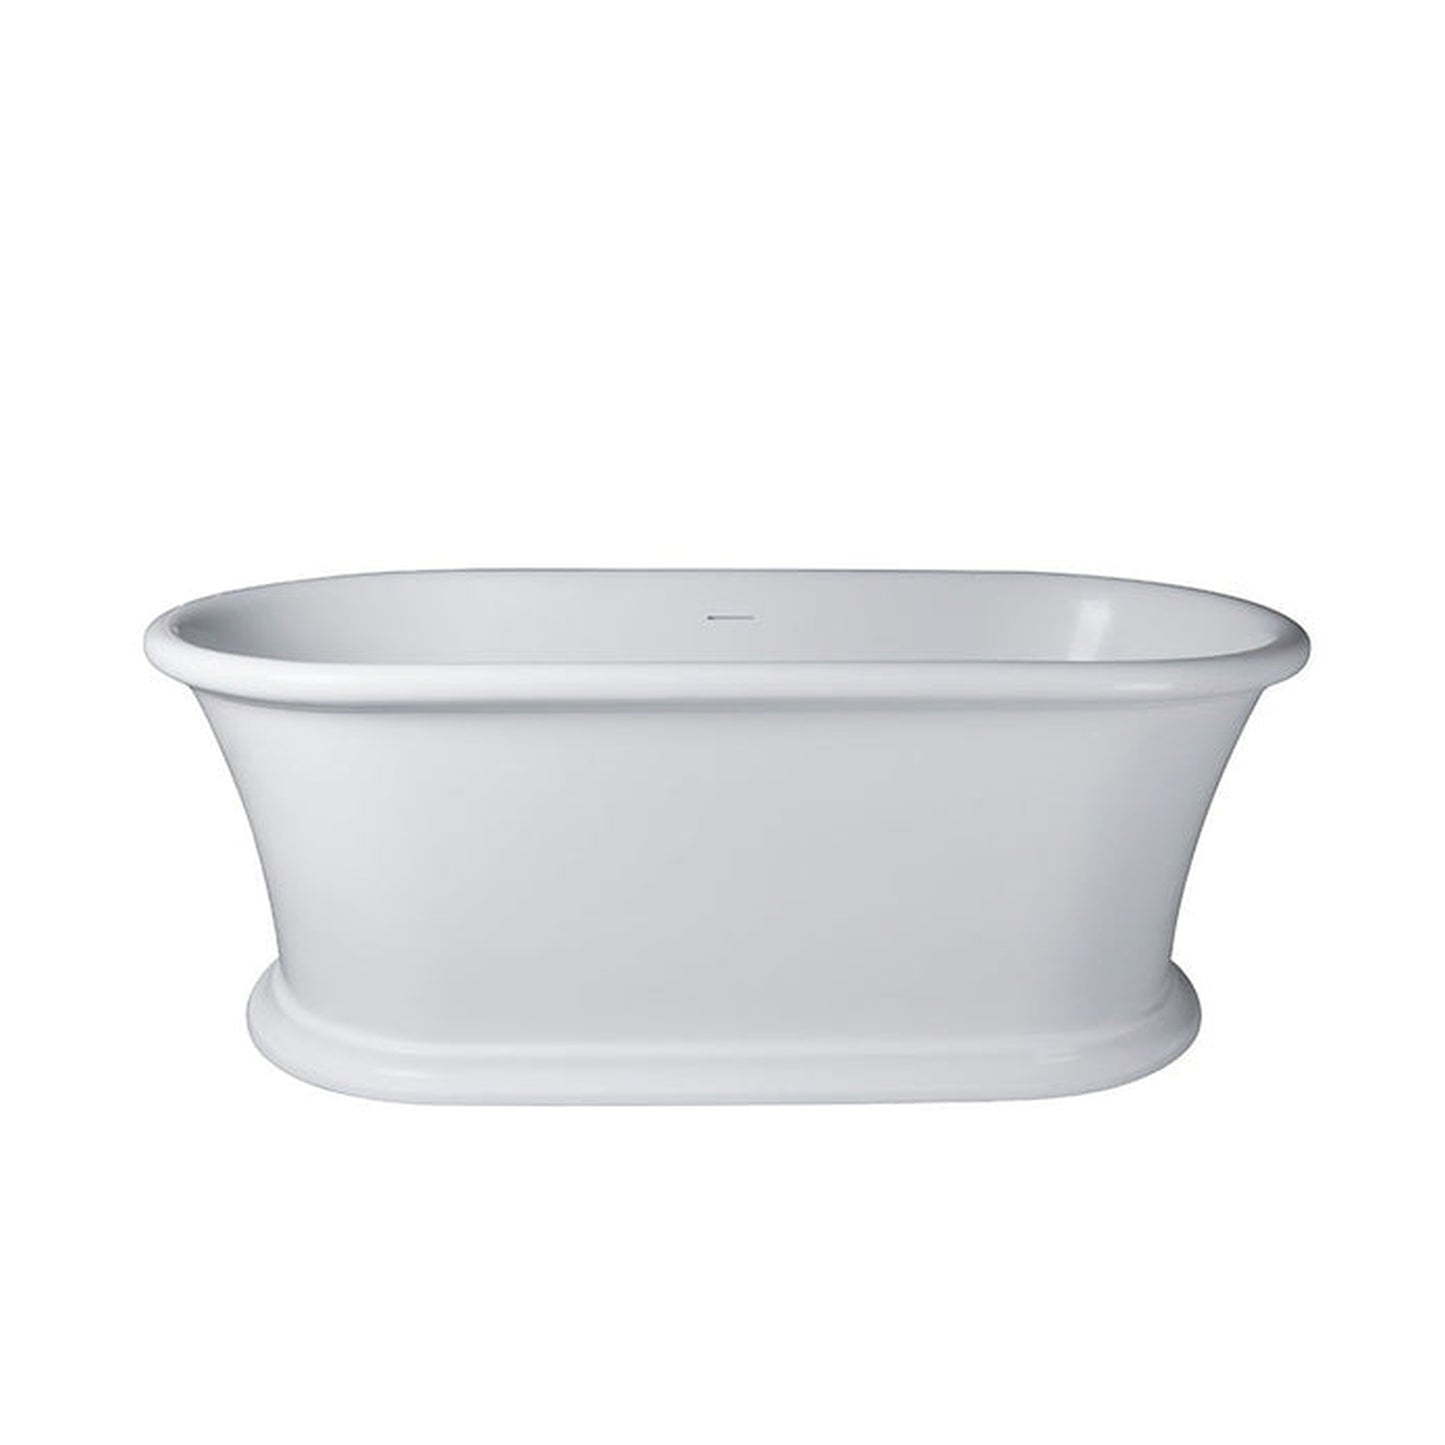 Vanity Art 67" Matte White Flatbottom Freestanding Solid Surface Resin Stone Bathtub With Slotted Overflow and Pop-up Drain